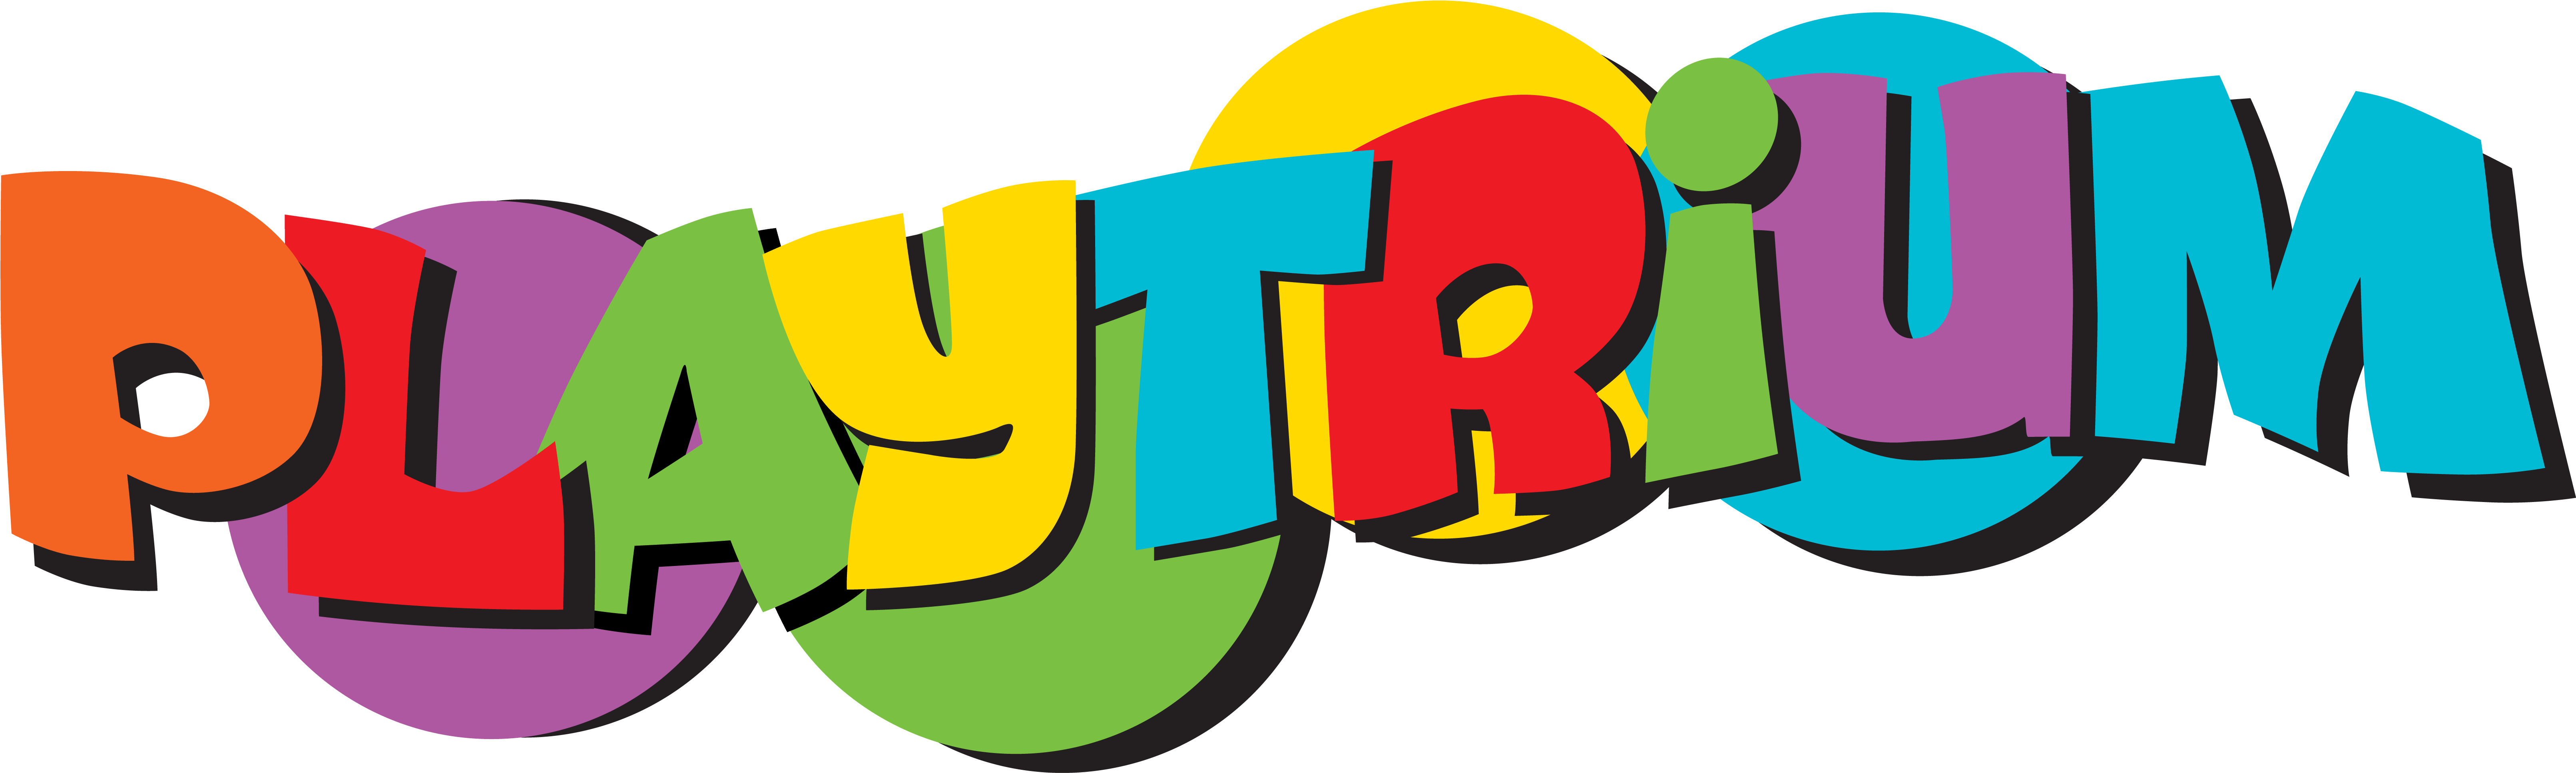 Kingston's Largest Indoor Play Centre - Playtrium Kingston Logo (6446x2075)